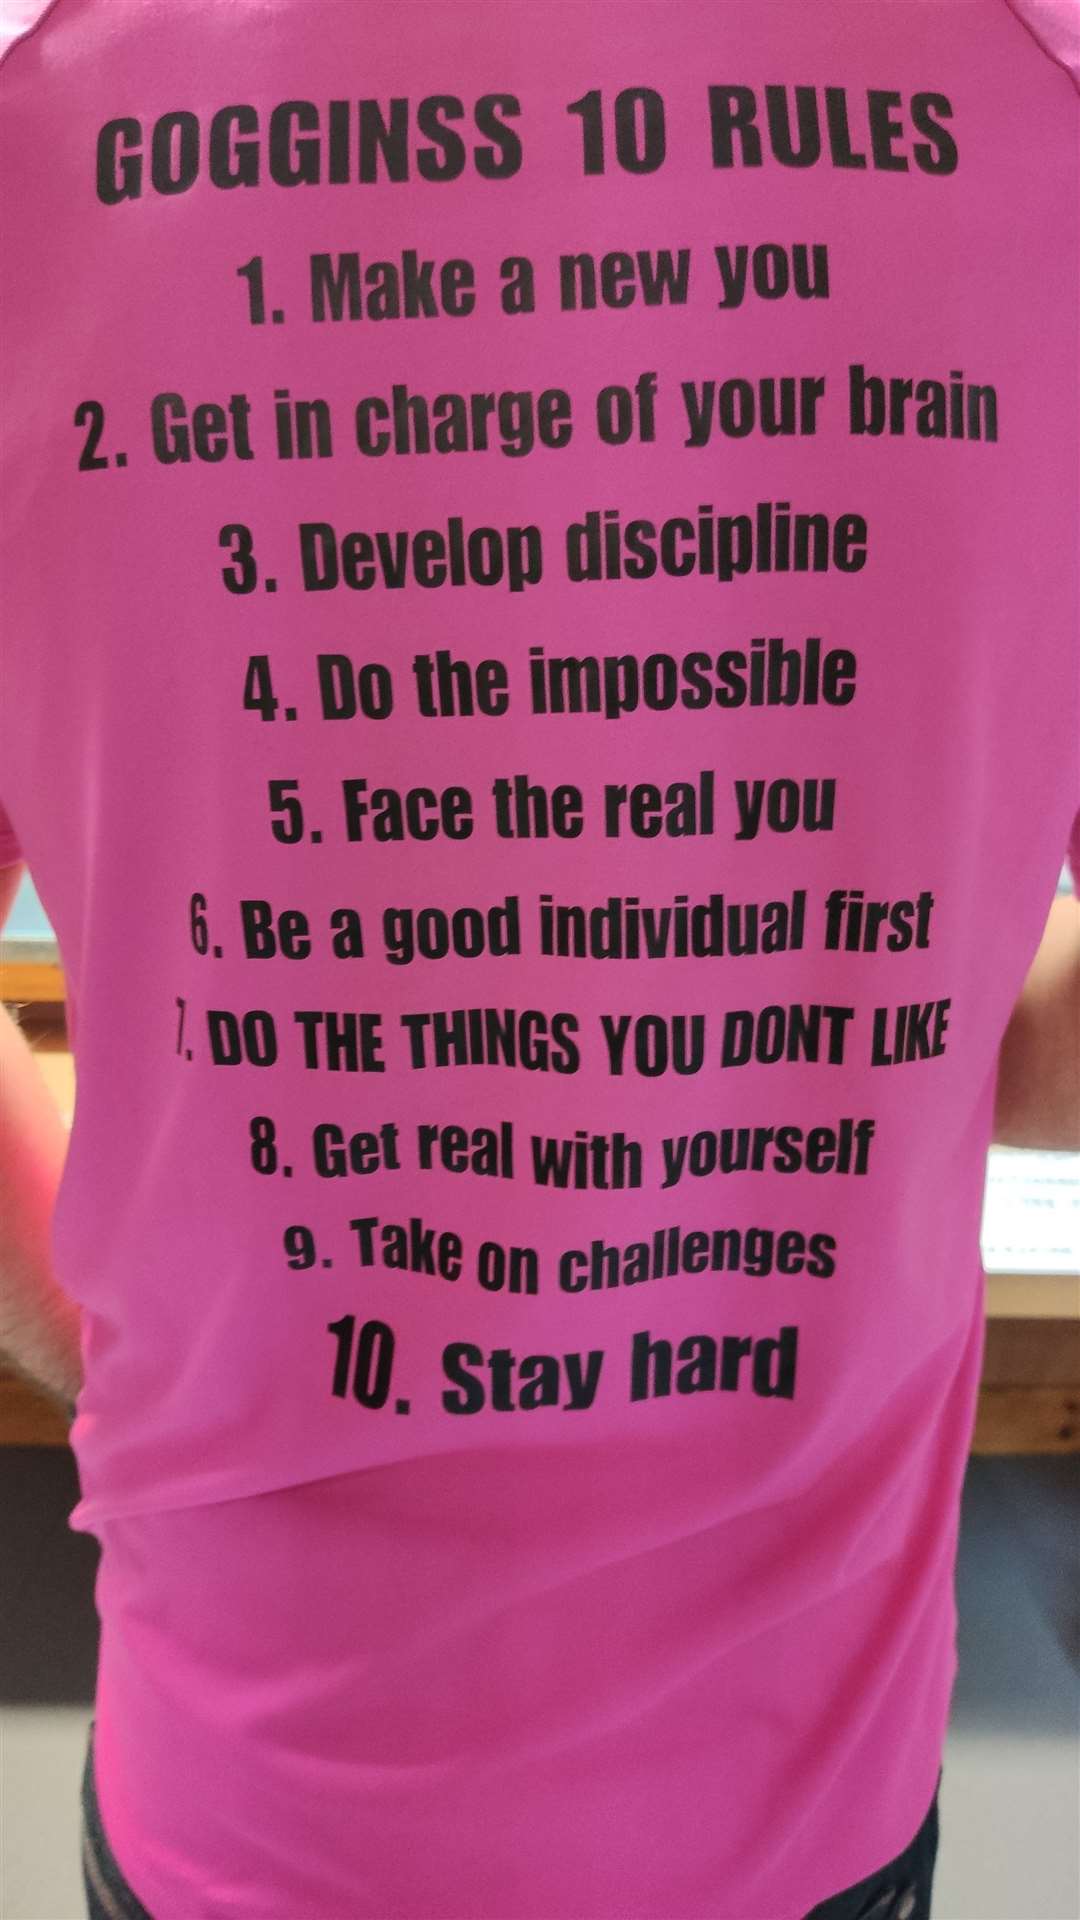 Ten rules from David Goggins, an American ultramarathon runner and triathlete, were printed on the back of the T-shirts.